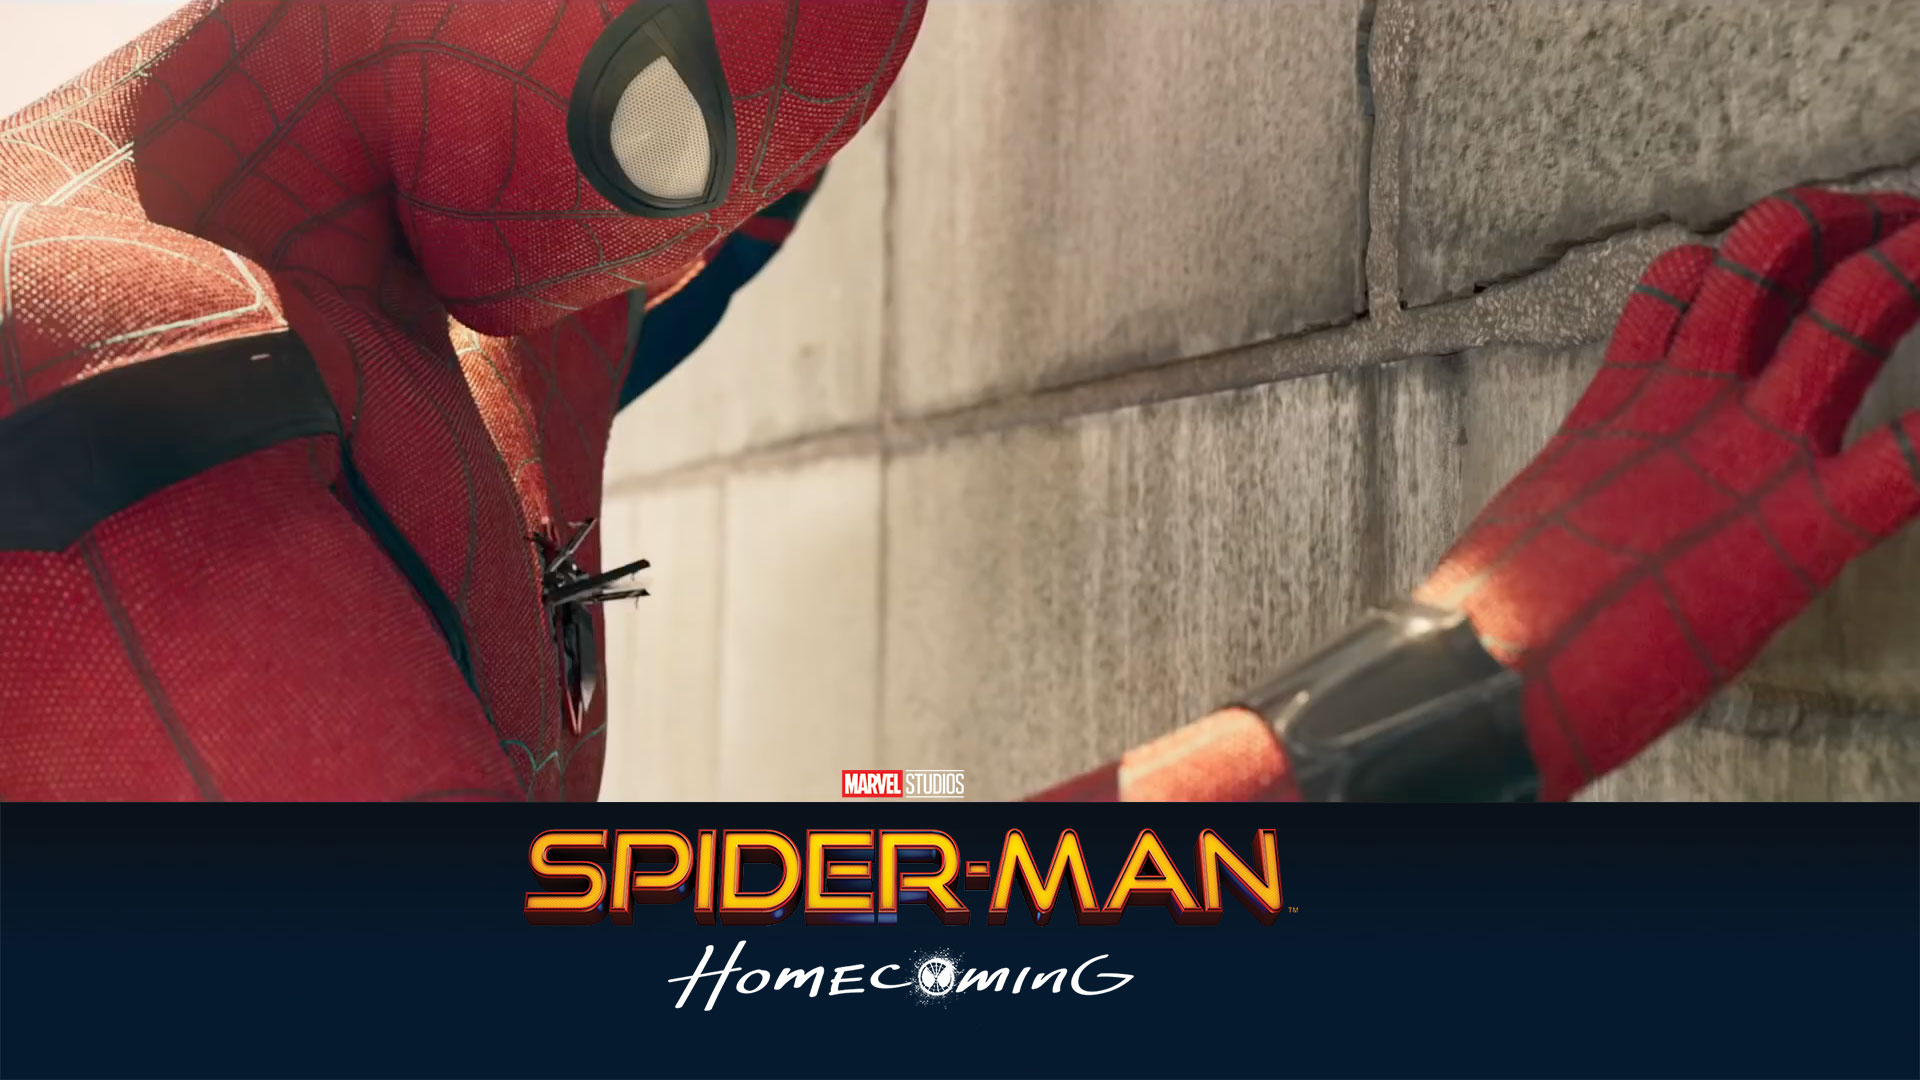 Spider-Man: Homecoming (2017) Movie | Desktop Wallpapers HD Quality